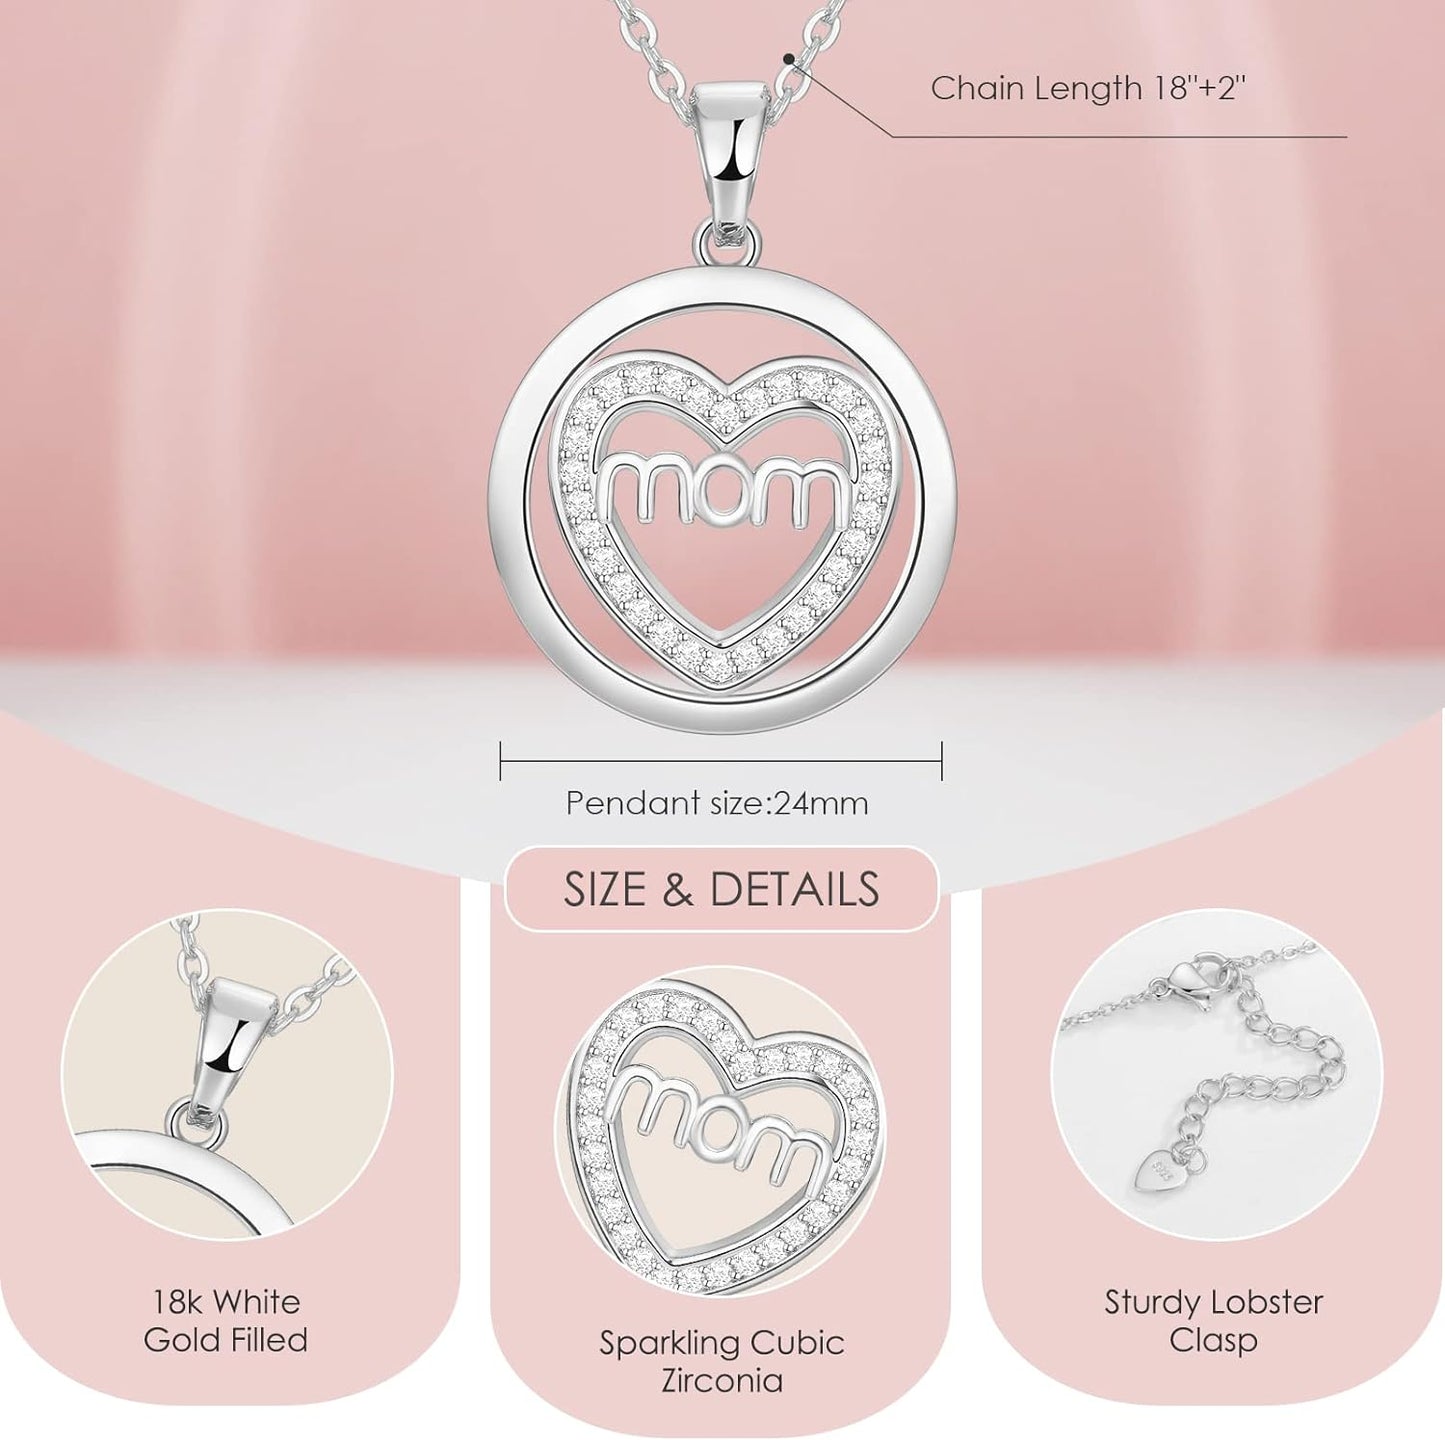 PAITAIN Circle Heart Mom Necklace, Birthday Gifts Mothers Day Gifts for Mom, 925 Sterling Silver Heart Necklace for Women Mom Grandma Wife Daughter Girlfriend on Valentine's Day Anniversary Thanksg